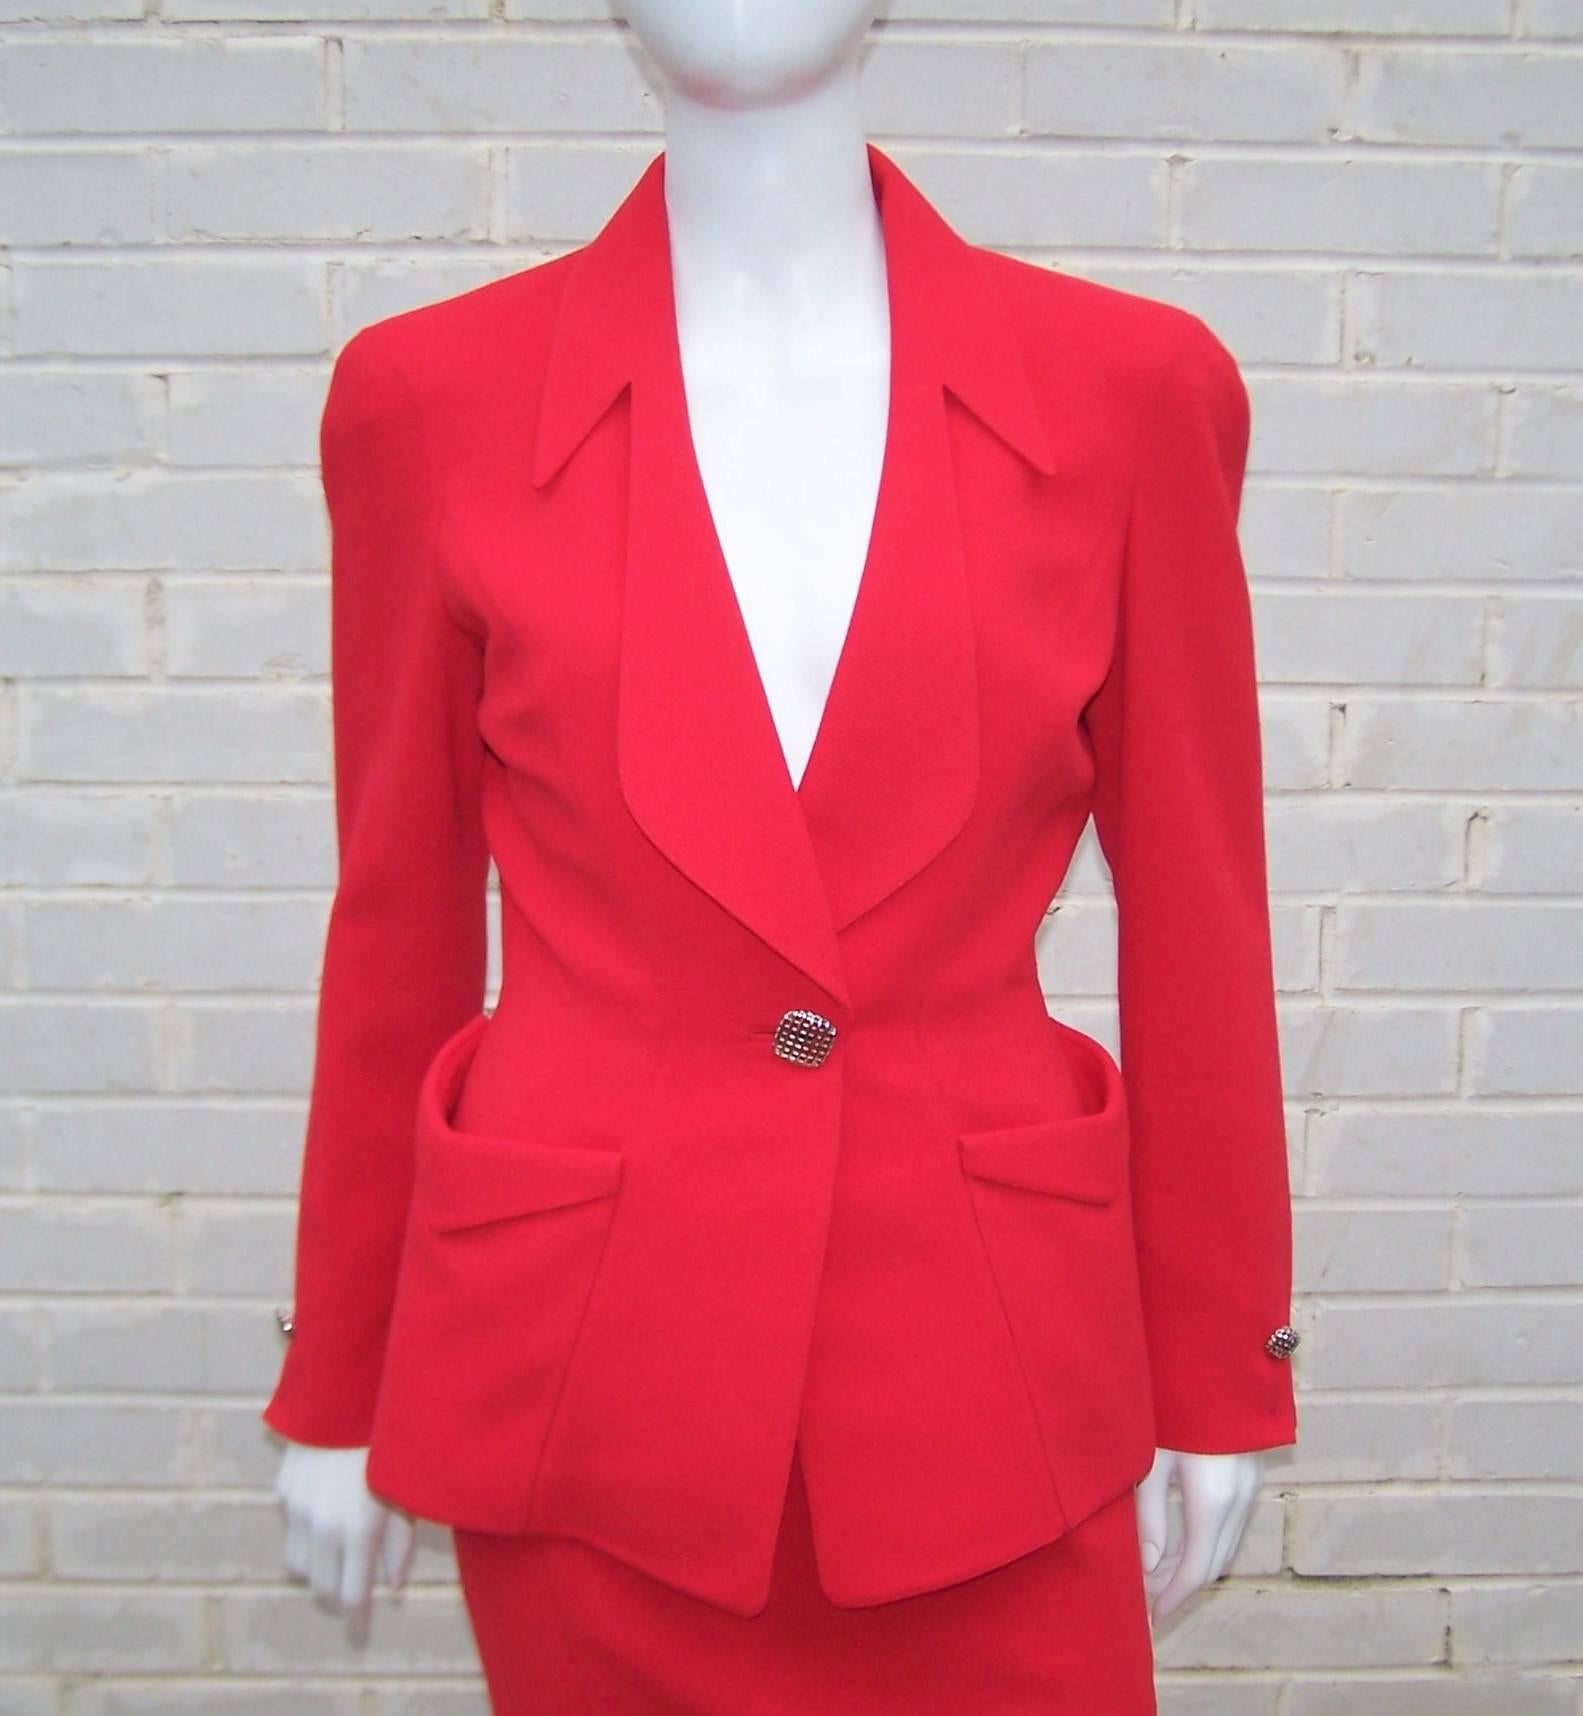 Thierry Mugler's signature futuristic style is evident is this vibrant red skirt suit.  The nipped waist jacket has stylized v-shaped pockets with an open sculptural collar typical of Mr. Mugler's designs and jewelry style silver metal buttons.  The